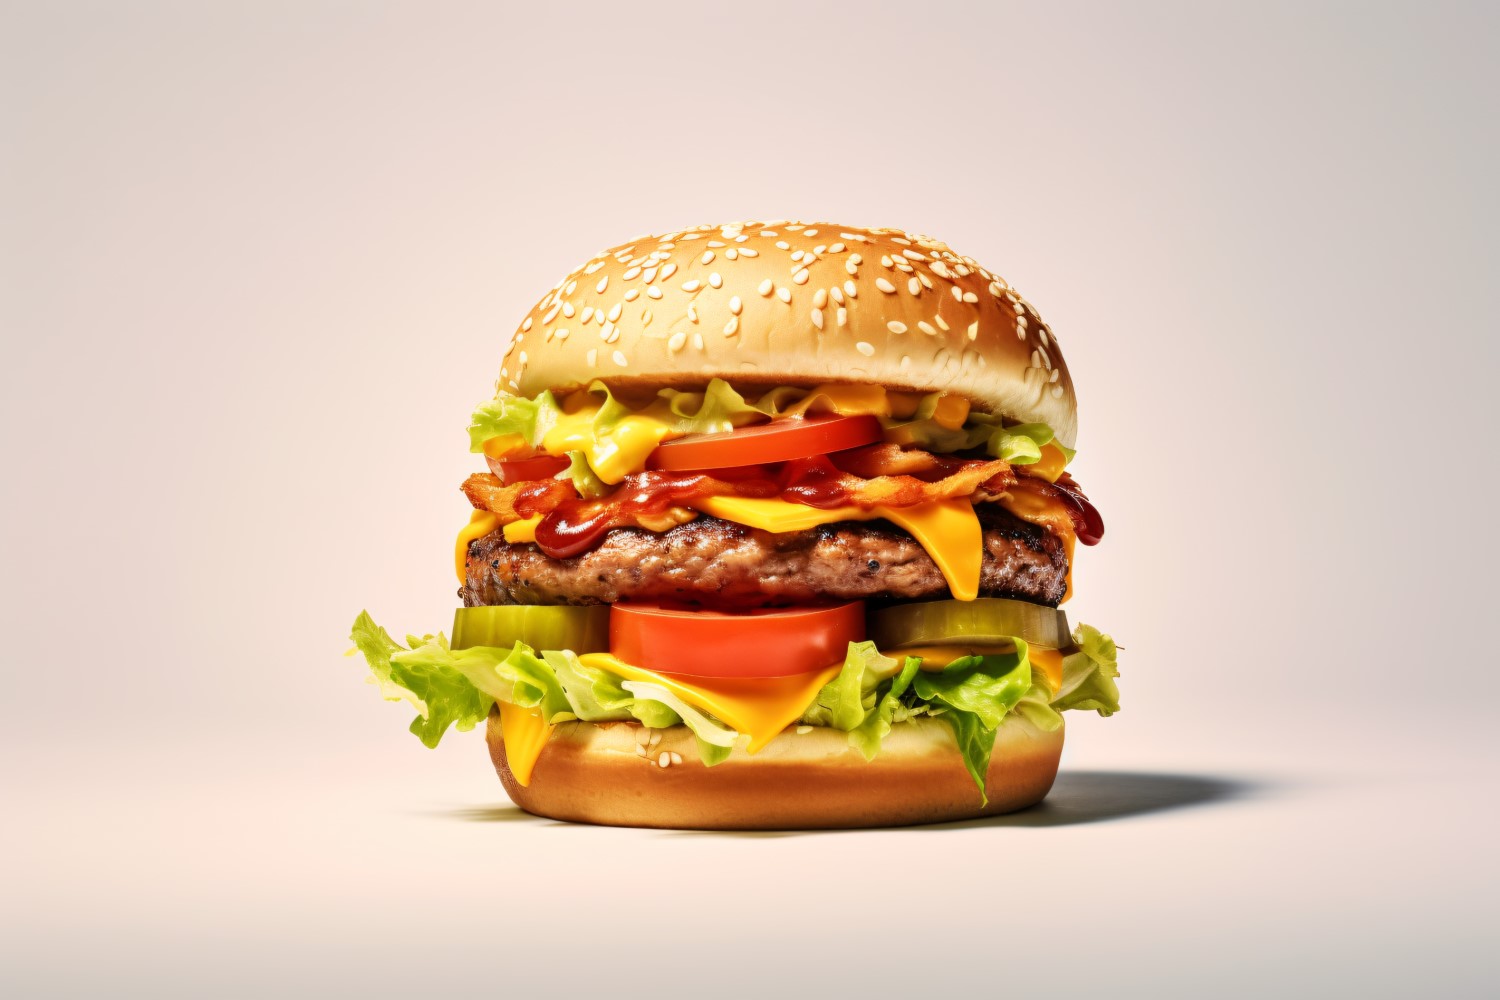 Bacon burger with beef patty, on white background 32